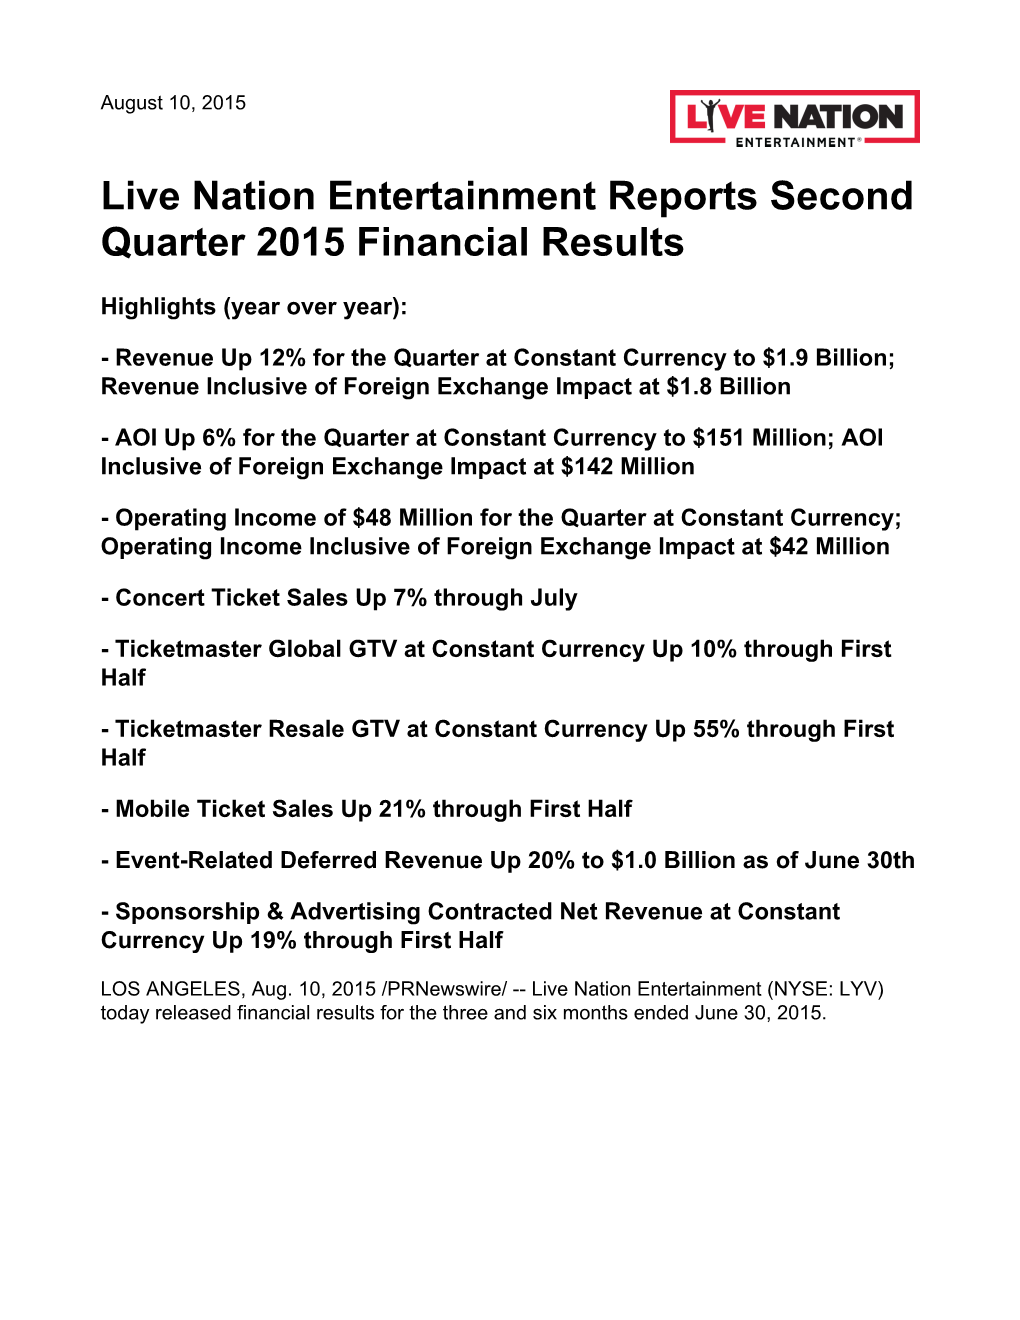 Live Nation Entertainment Reports Second Quarter 2015 Financial Results